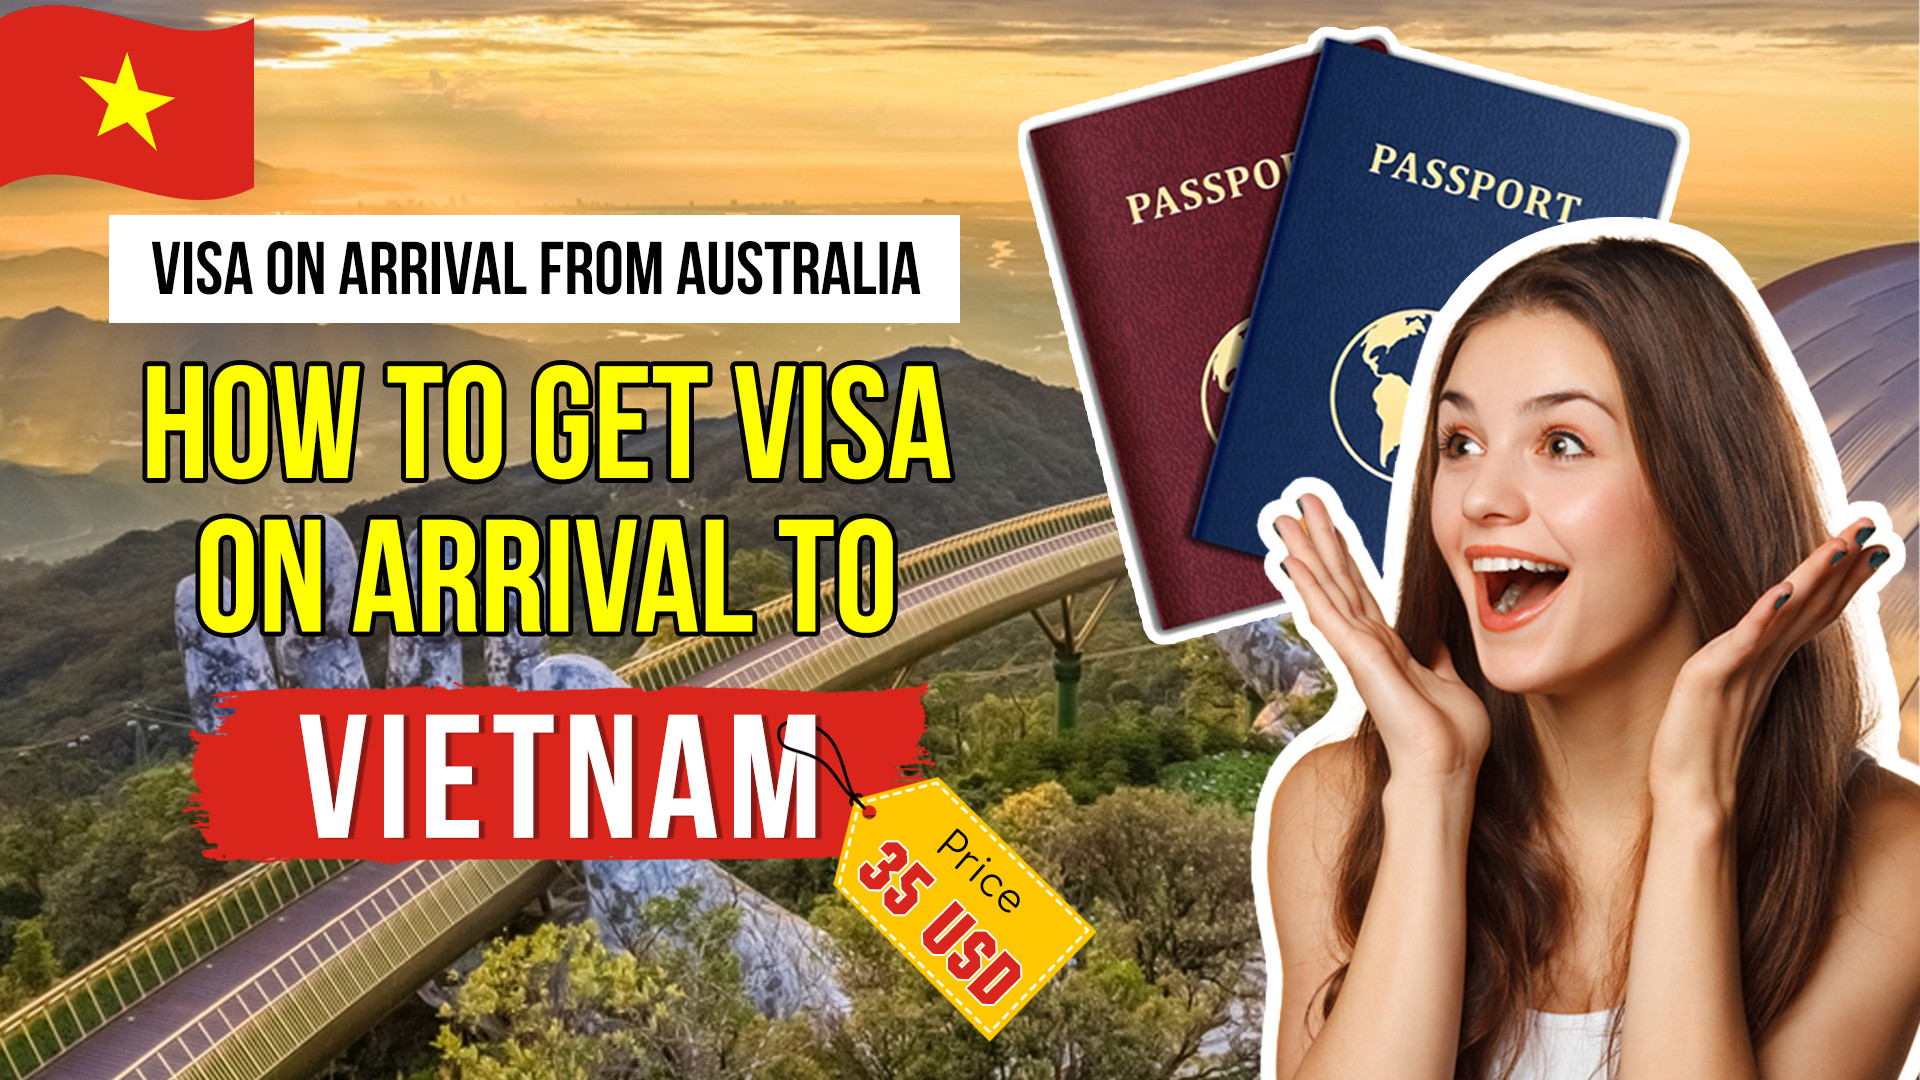 How to apply vietnam visa for 5 years?